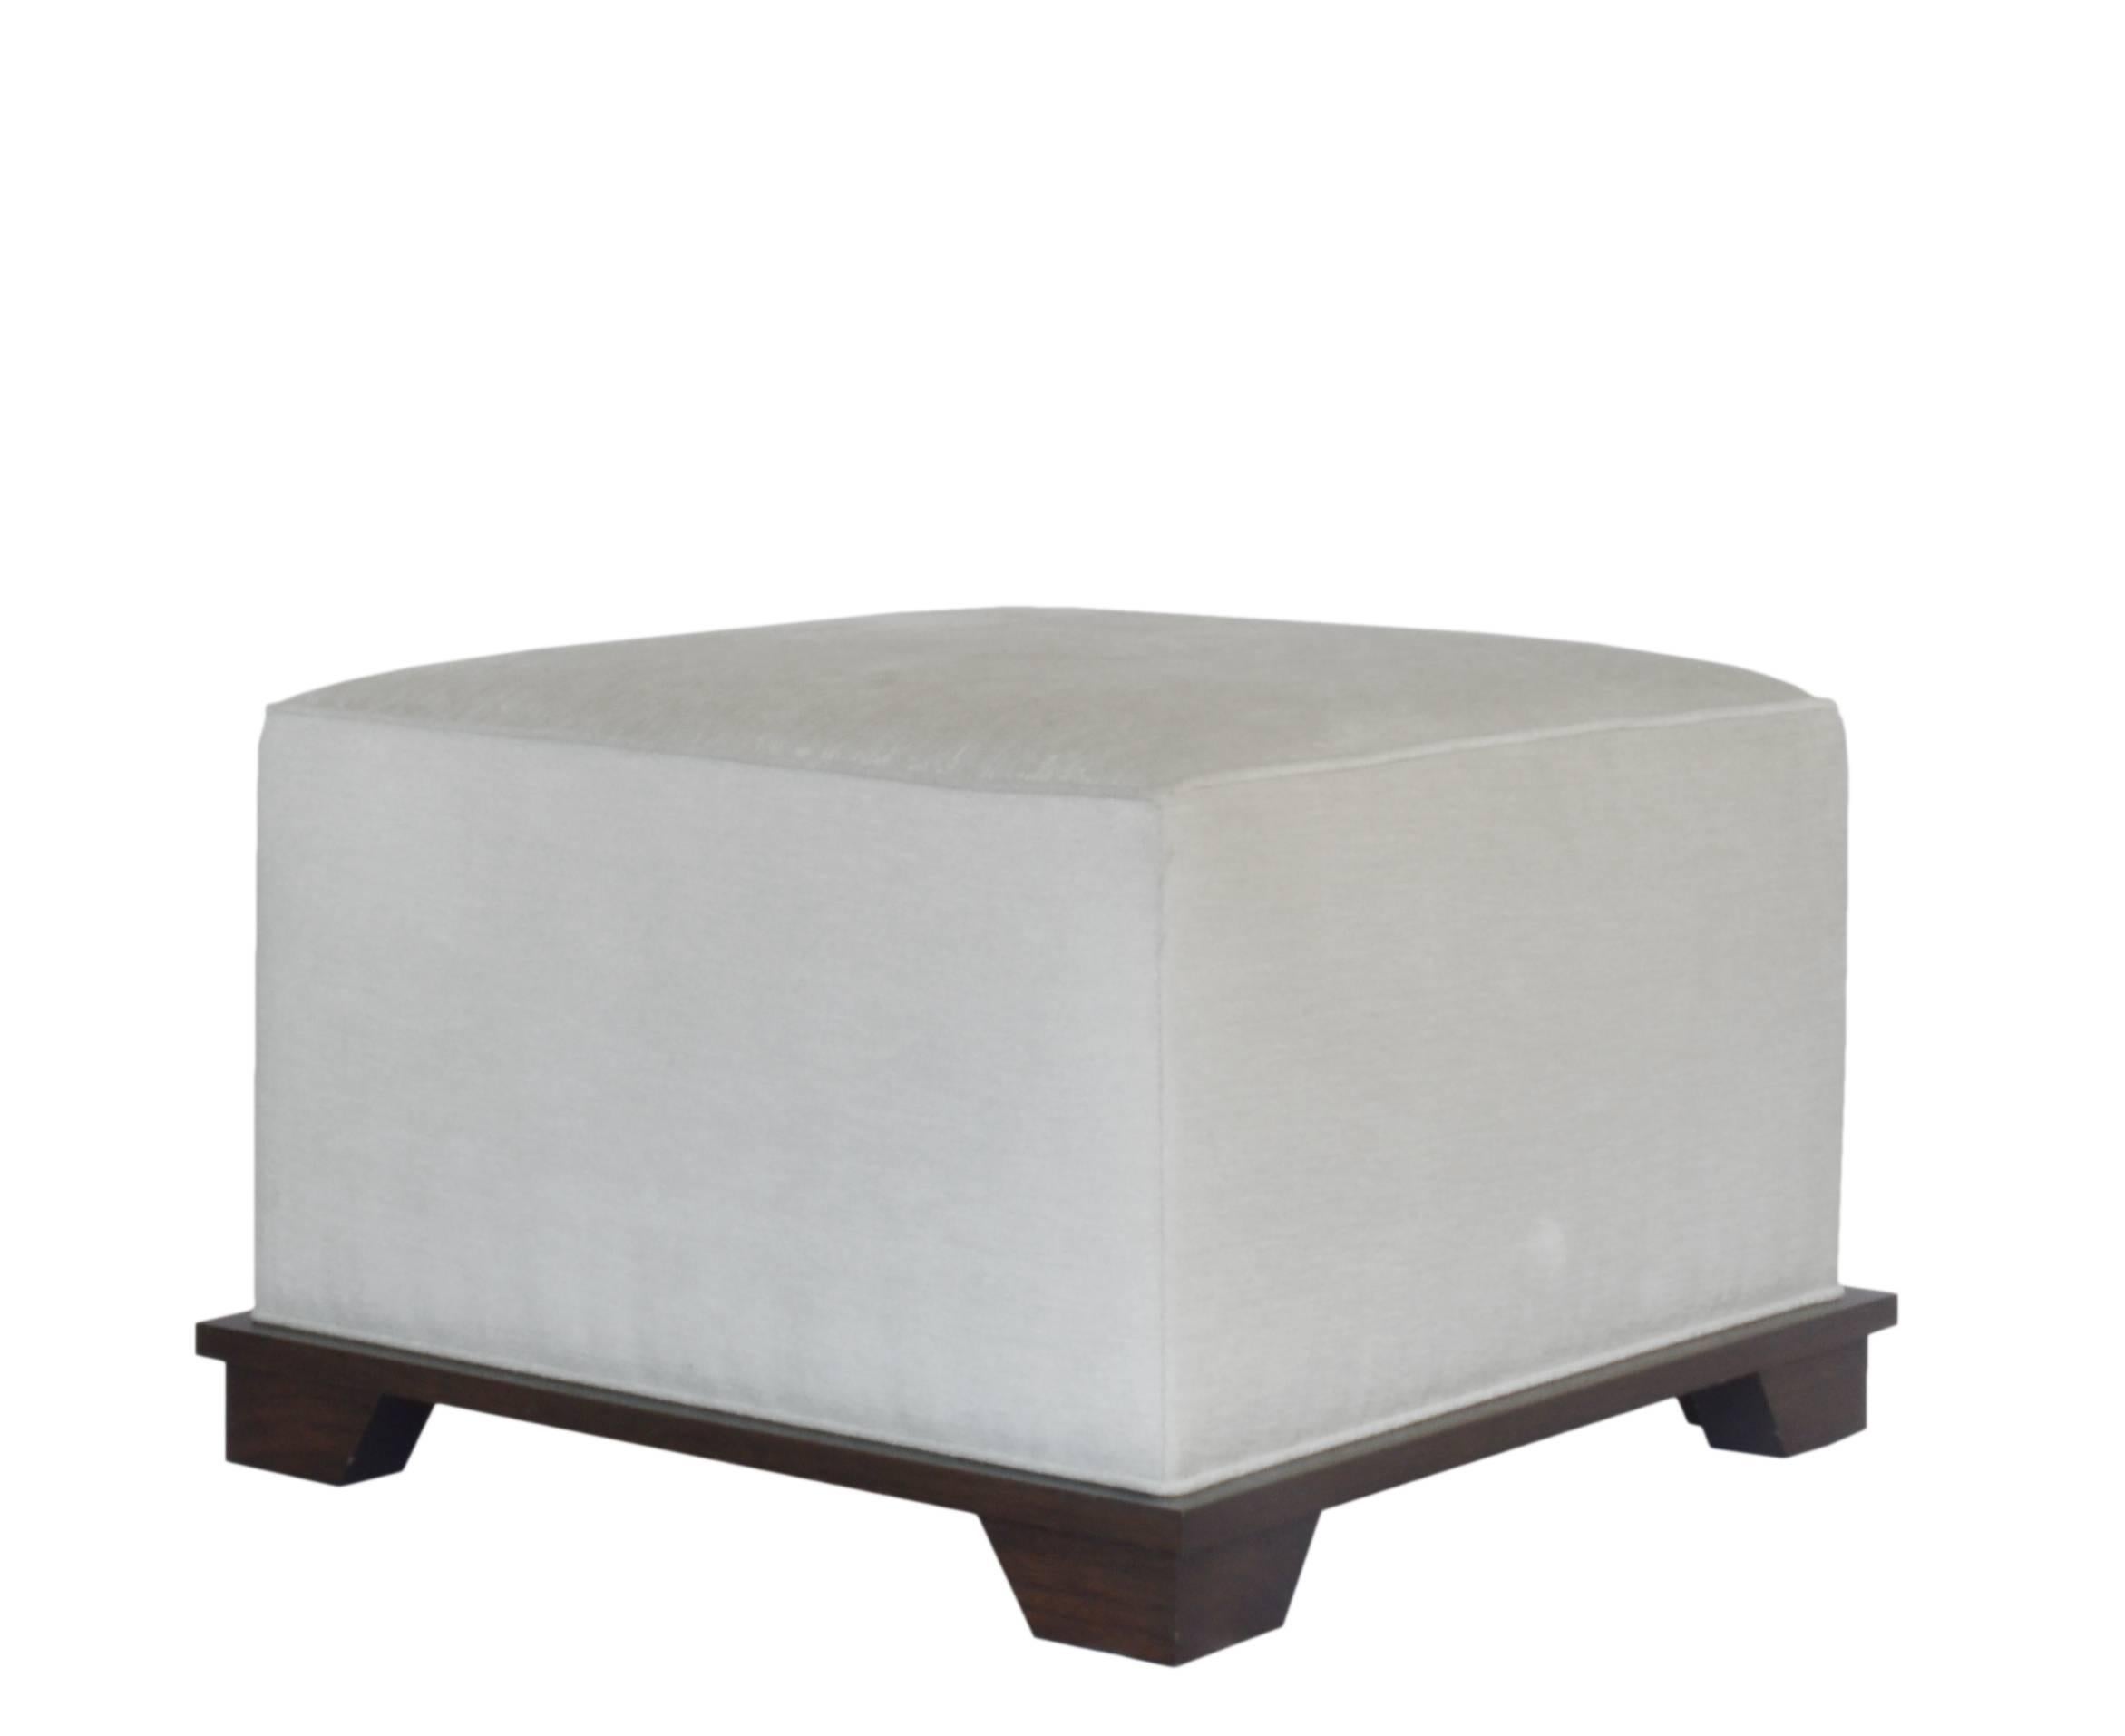 Custom ottoman designed by Neal Beckstedt Studio. Upholstery available in COM/COL.